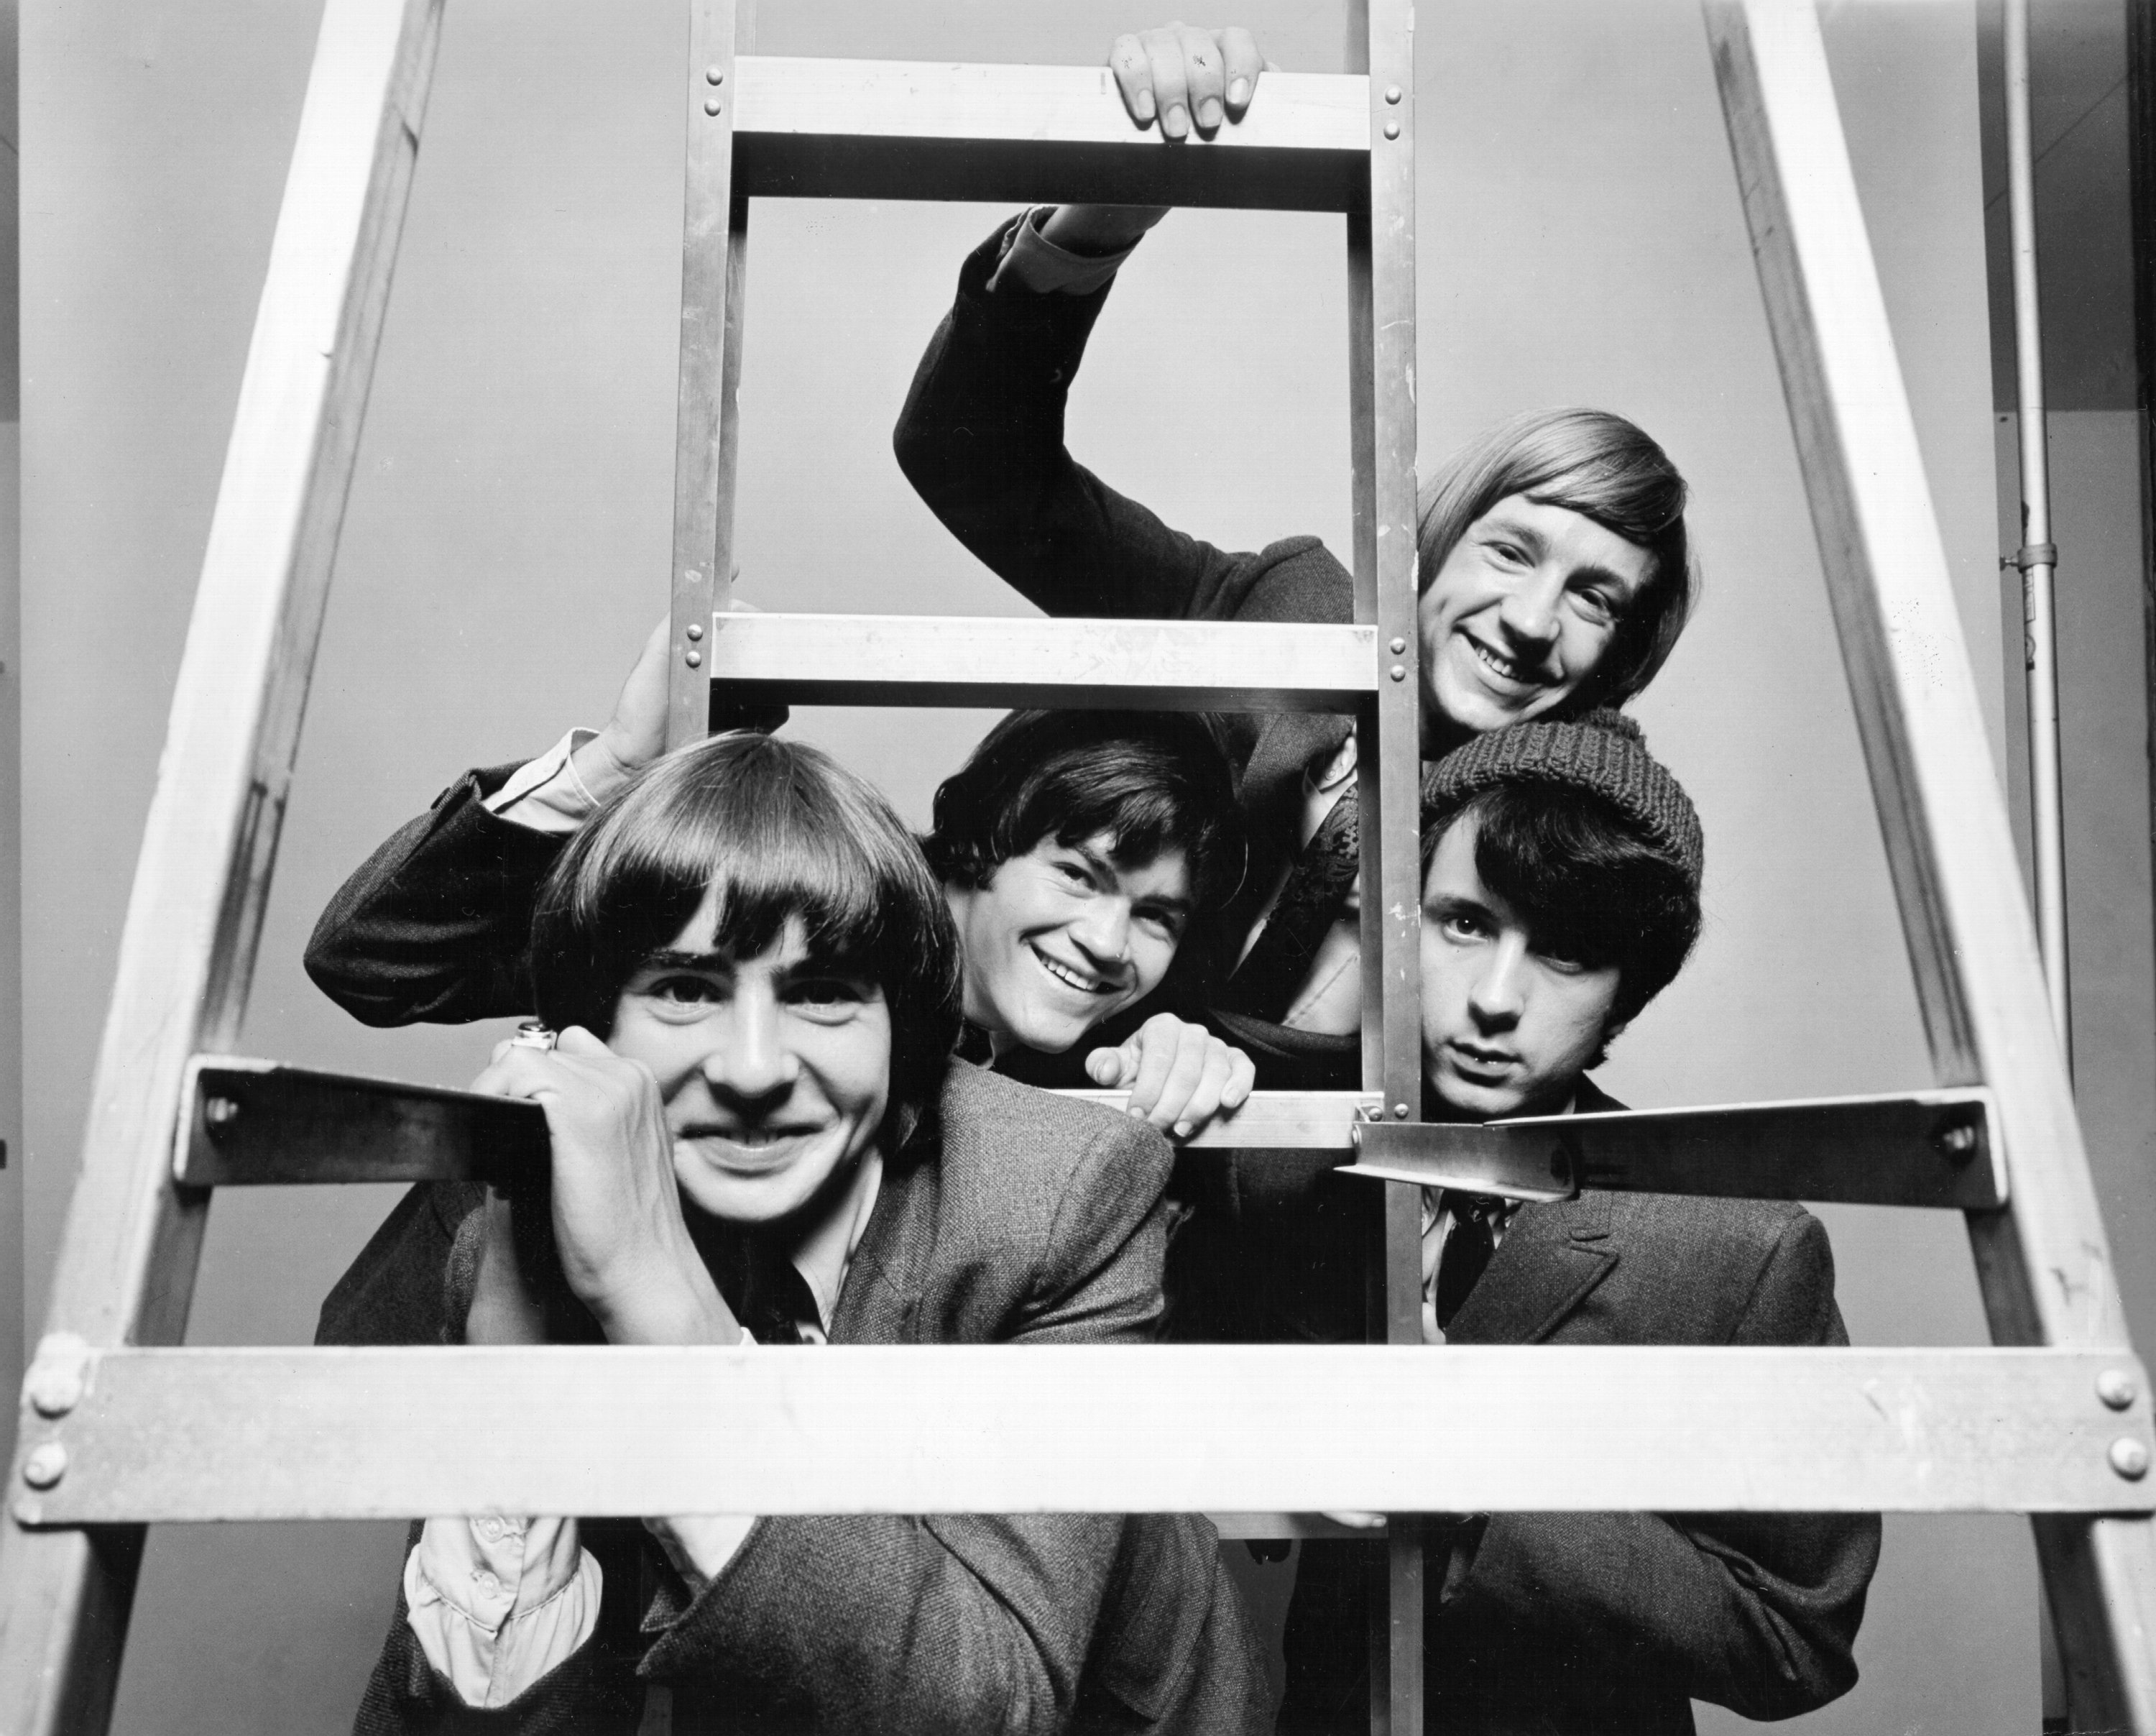 The Monkees' Davy Jones, Micky Dolenz, Peter Tork, and Mike Nesmith with a ladder